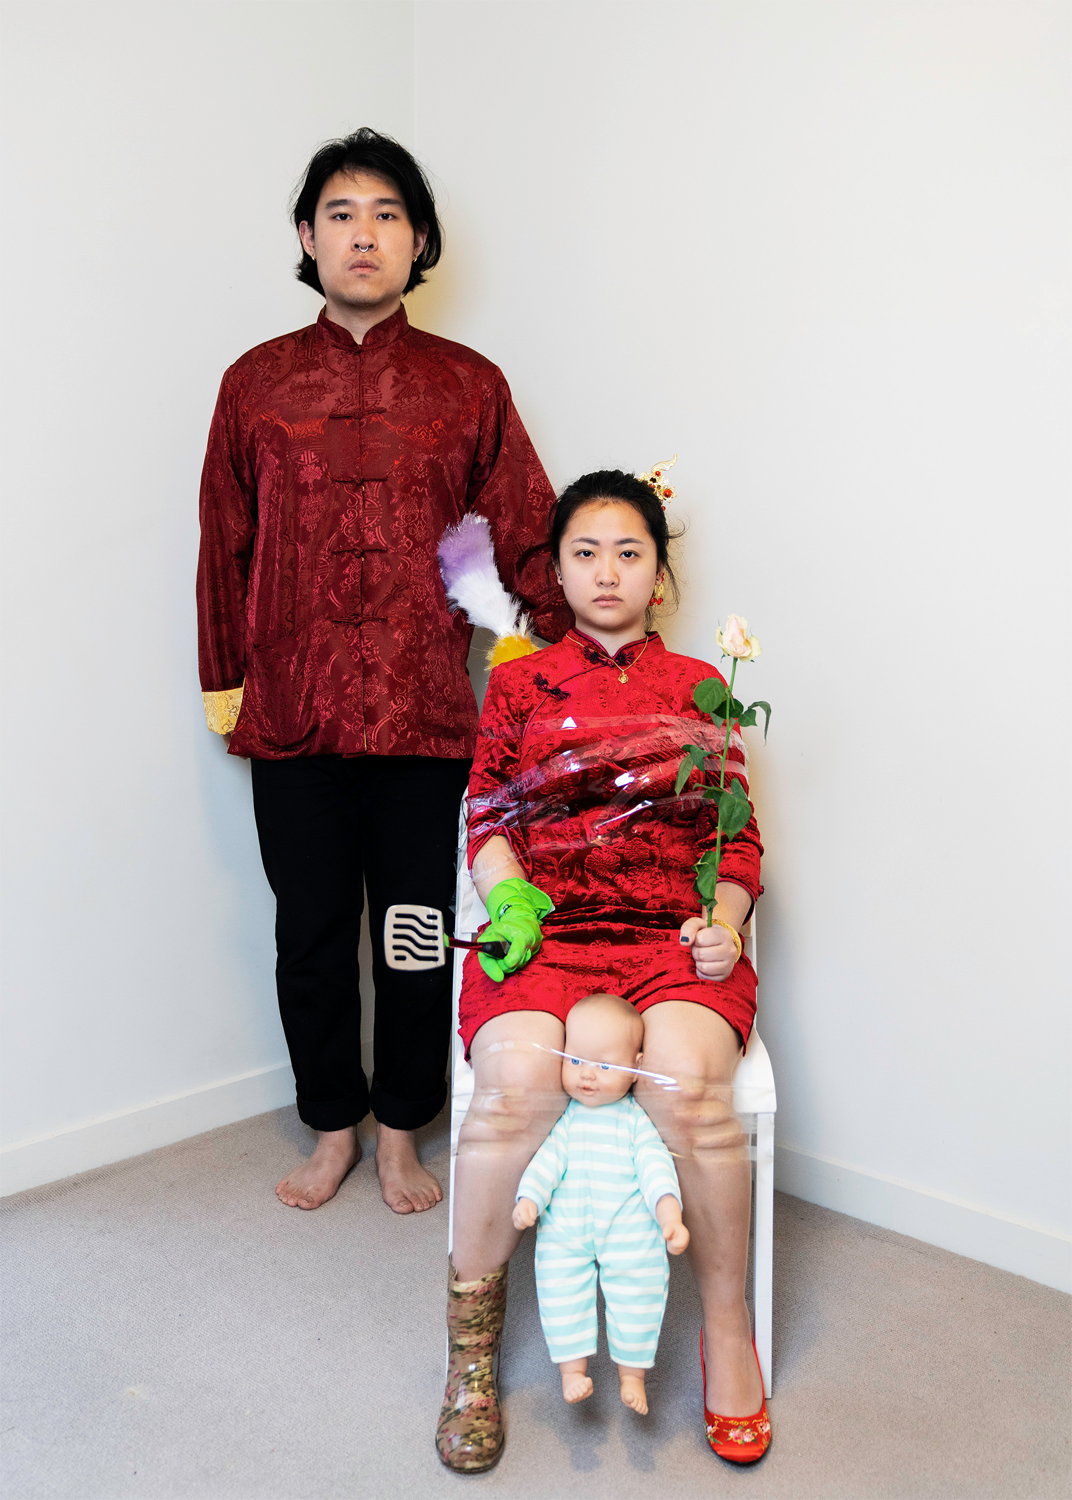 Fetter, Chinese culture, marriage, staged photography, self-portraiture.